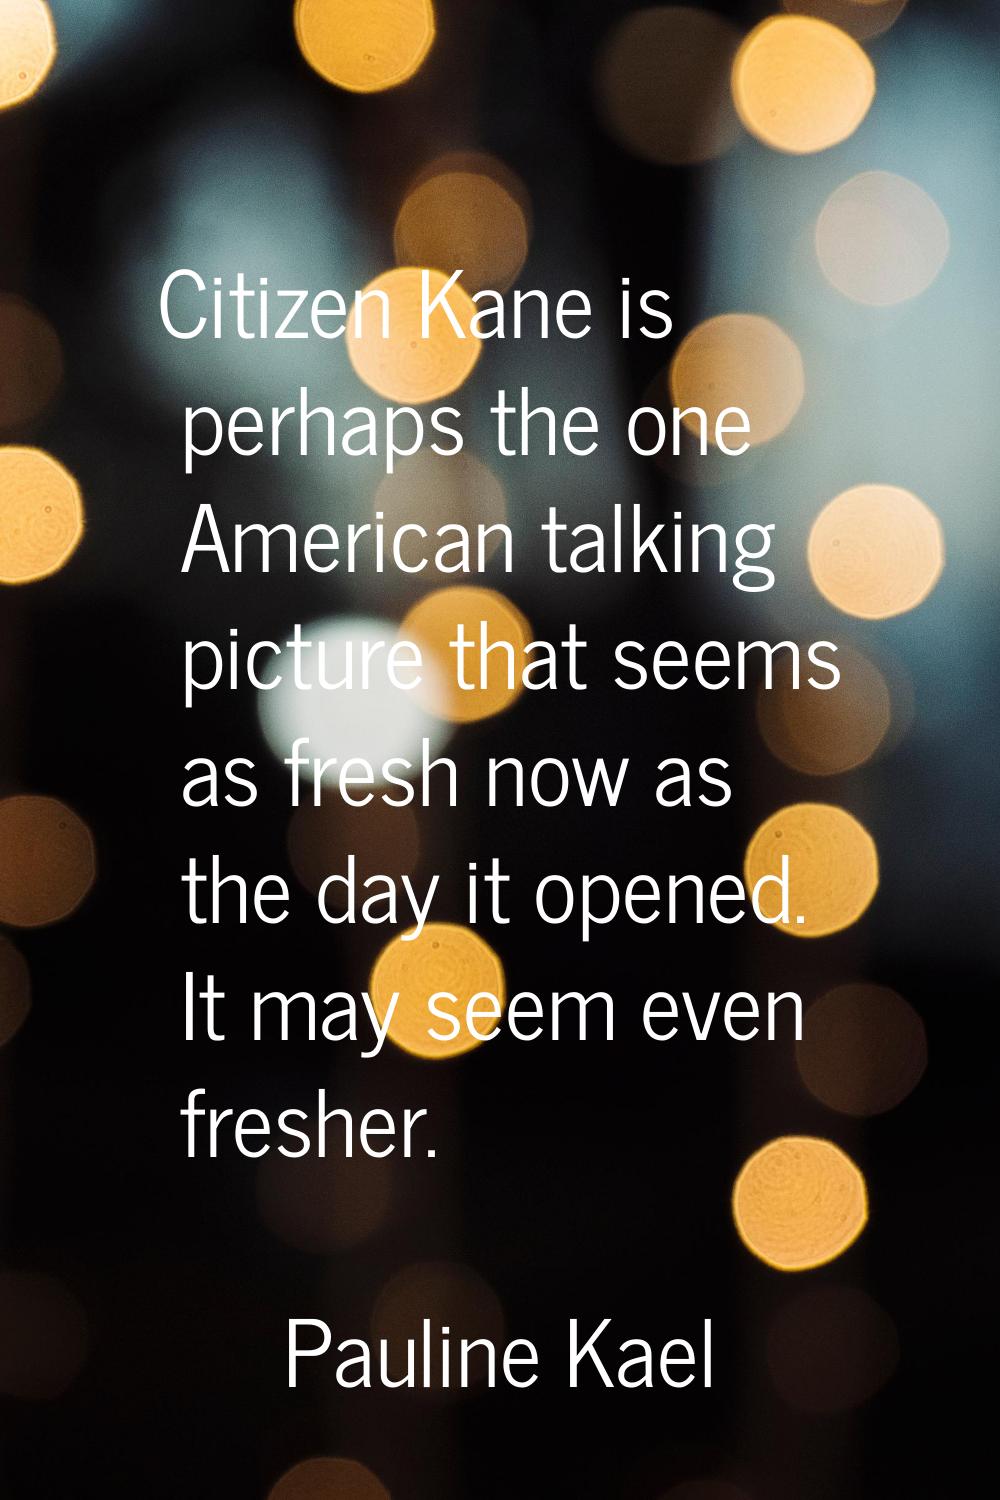 Citizen Kane is perhaps the one American talking picture that seems as fresh now as the day it open